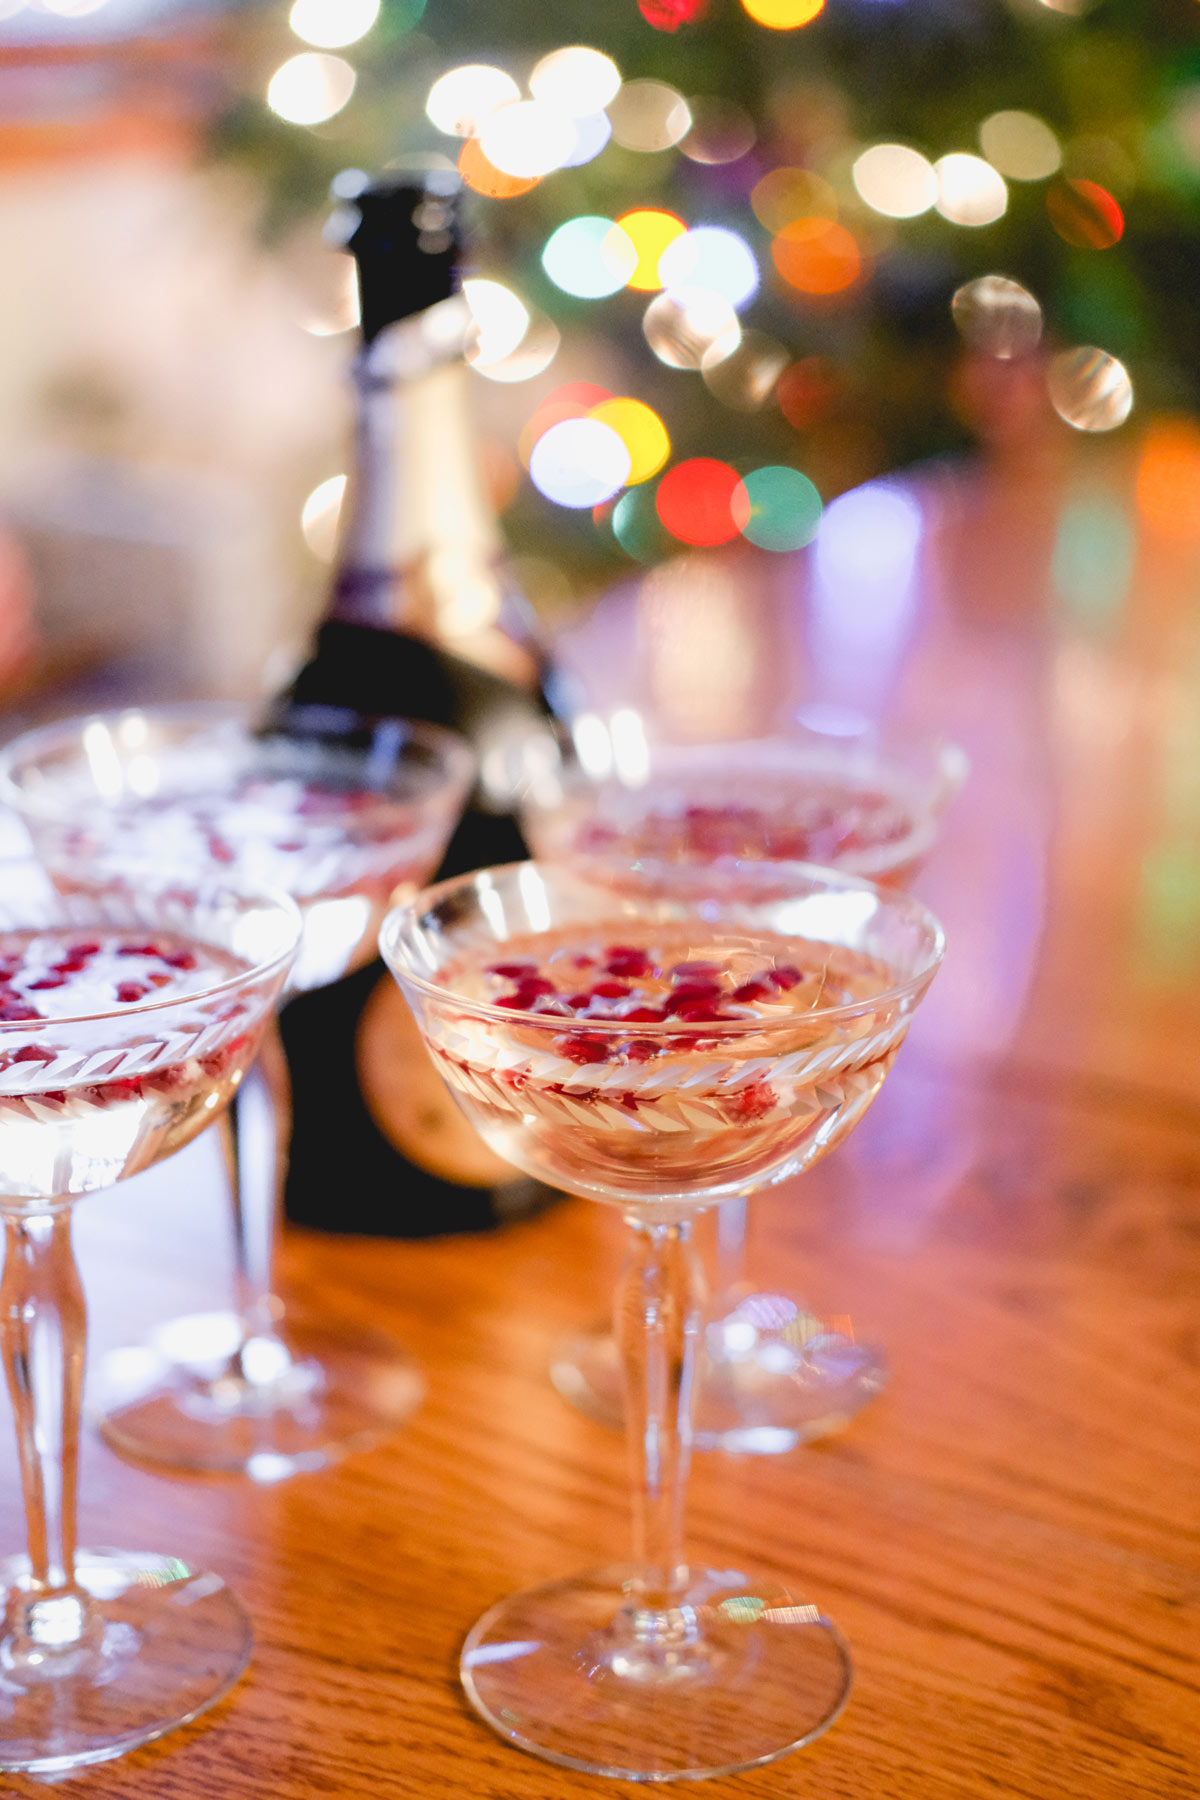 A Festive, Holiday Prosecco Drink